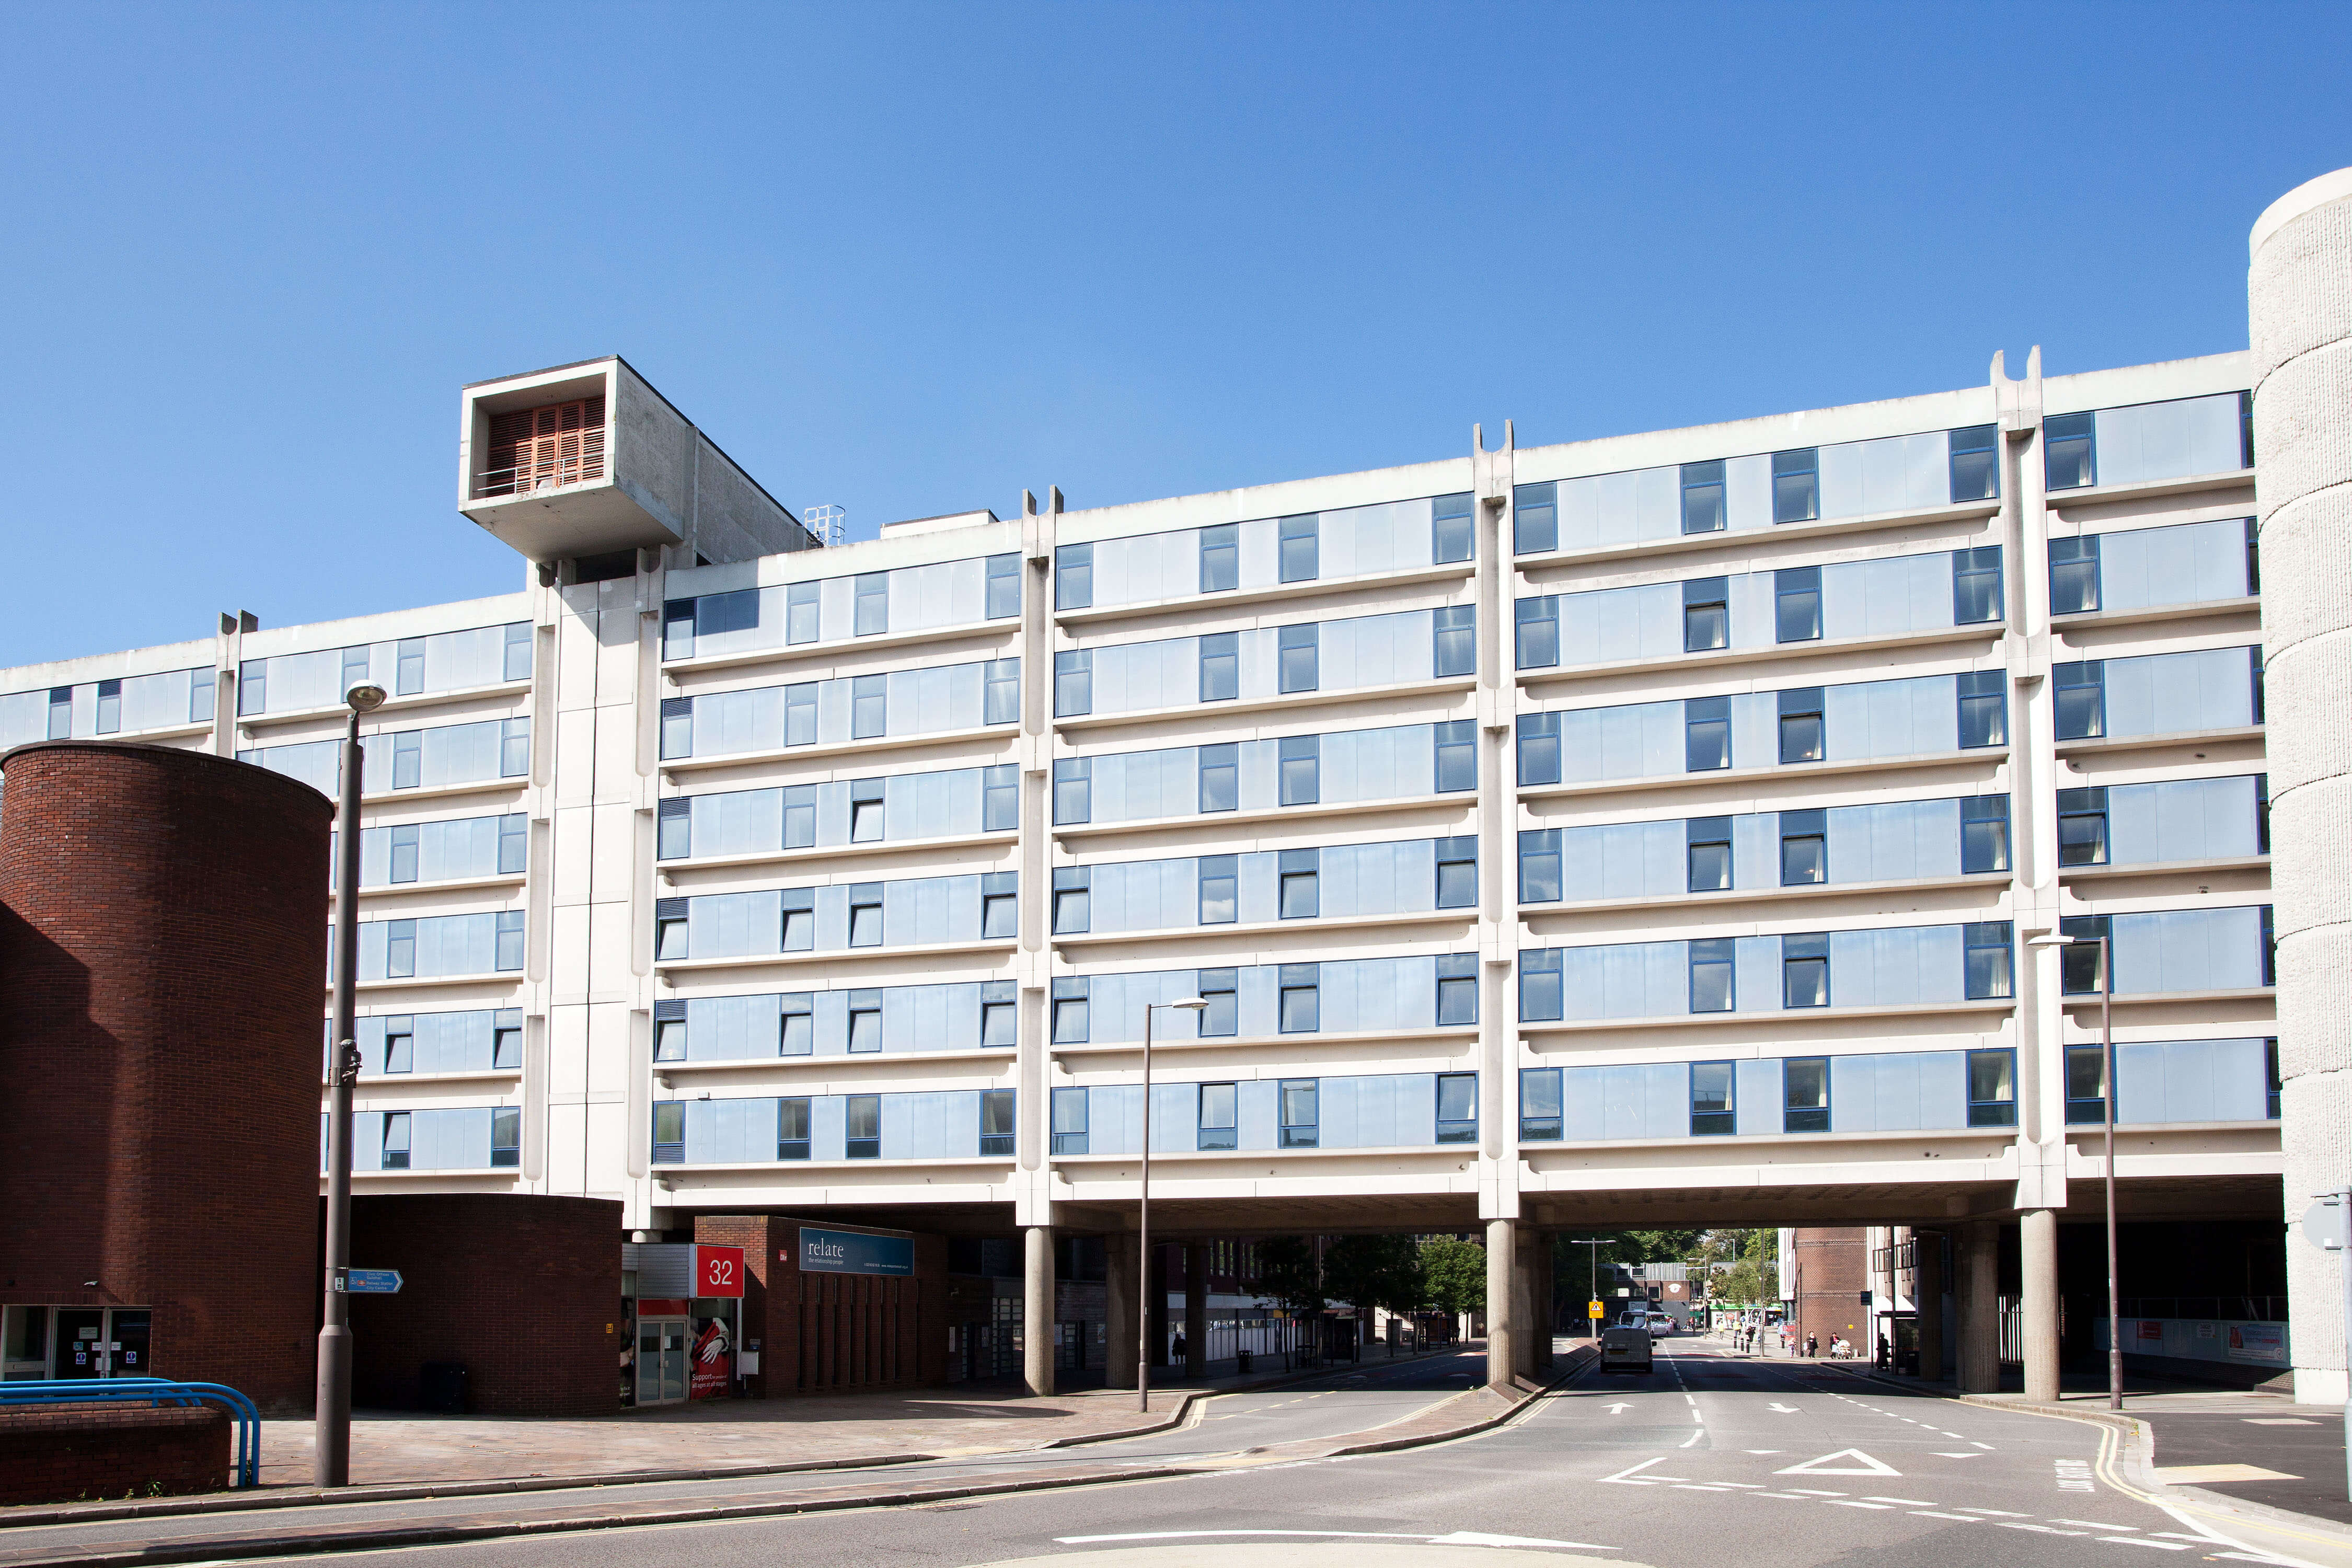 Unite Students accommodation at Margaret Rule Hall in Portsmouth